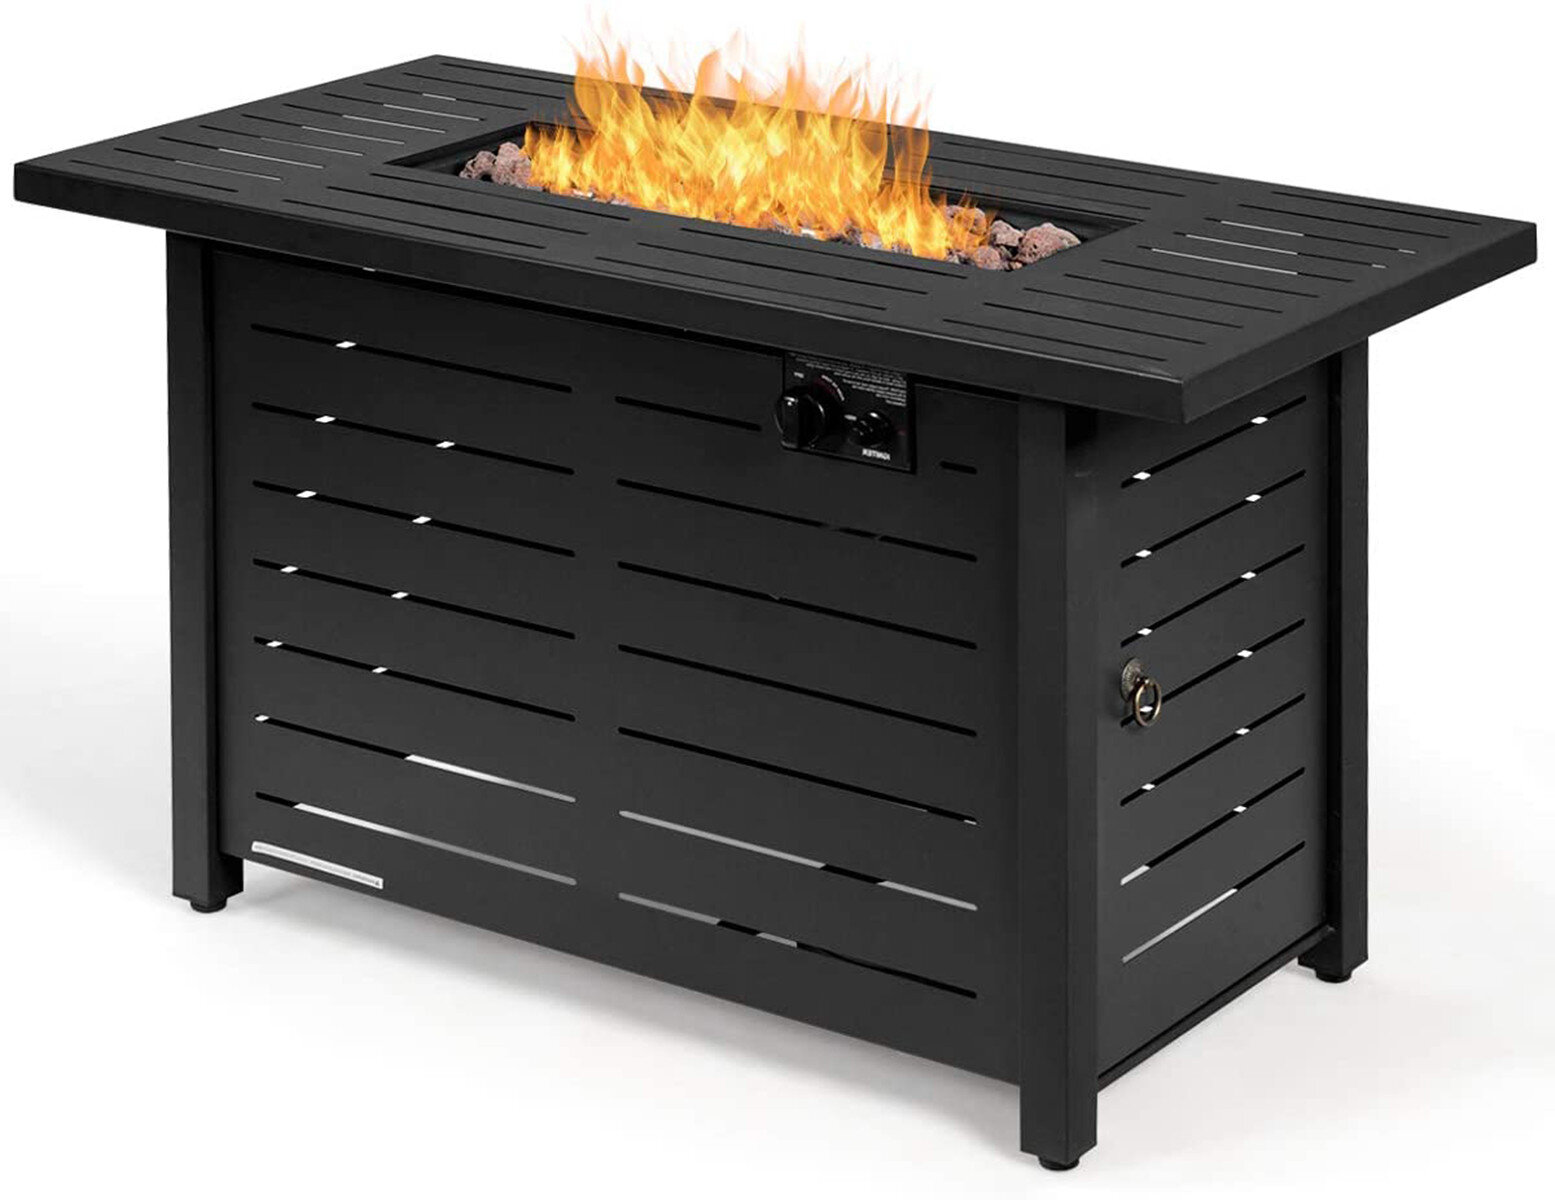 Shoppingwill Inc Stainless Steel Propane Fire Pit Table Reviews Wayfair